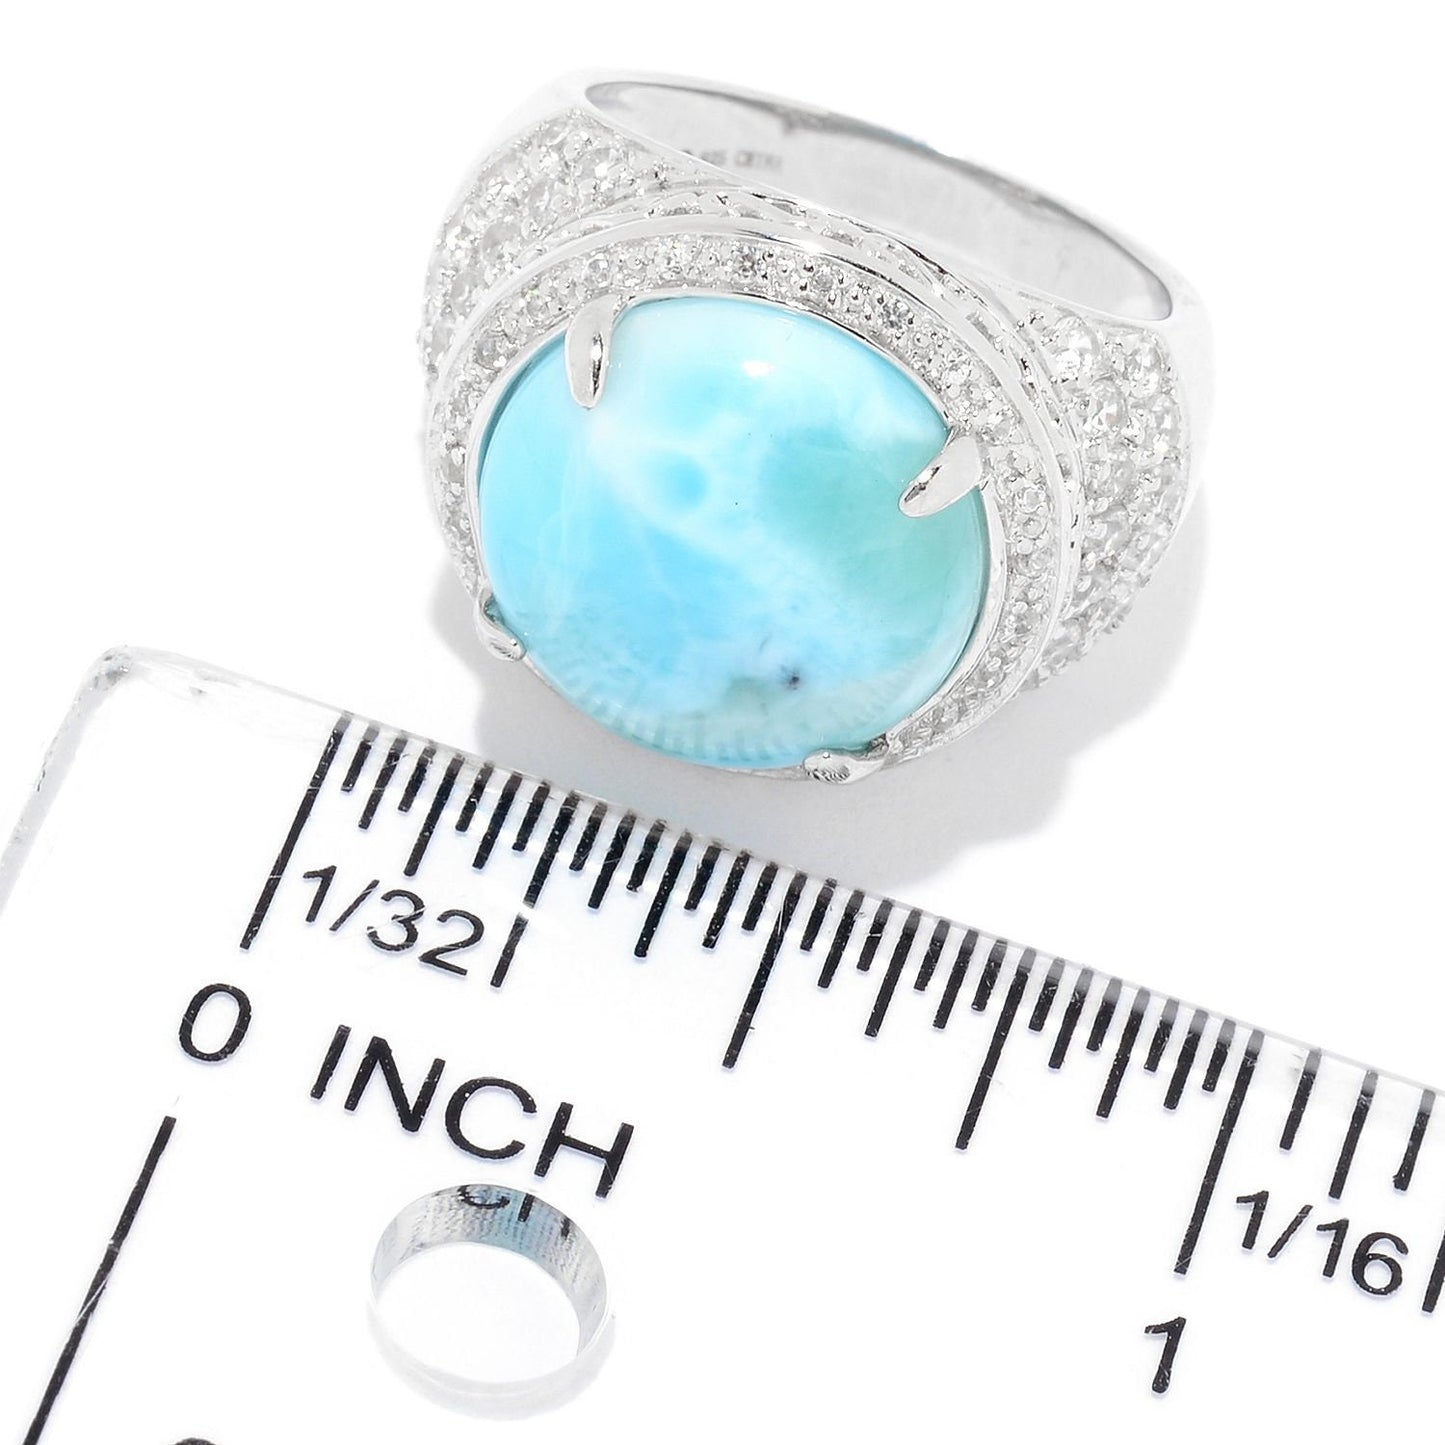 Larimar Gemstone Ring, 925 Sterling Silver Ring, Engagement Ring, Boho Jewelry Anniversary Gift-Gift For Her